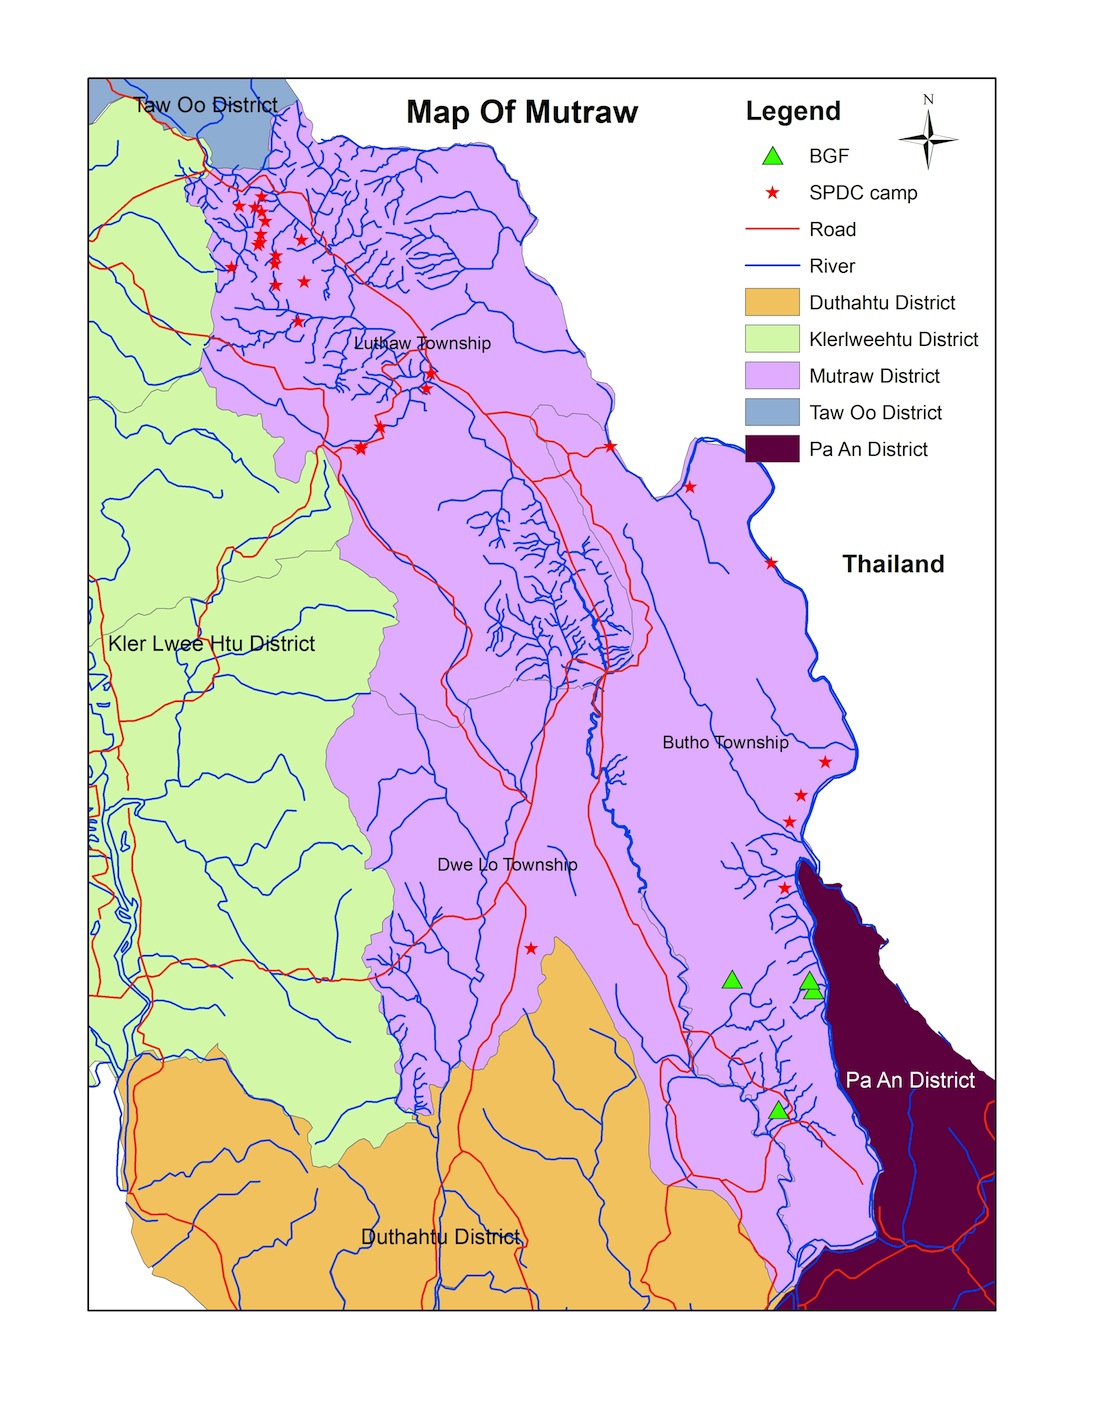 Despite Ceasefire Agreements, Burma Army Uses Forced Labor ...